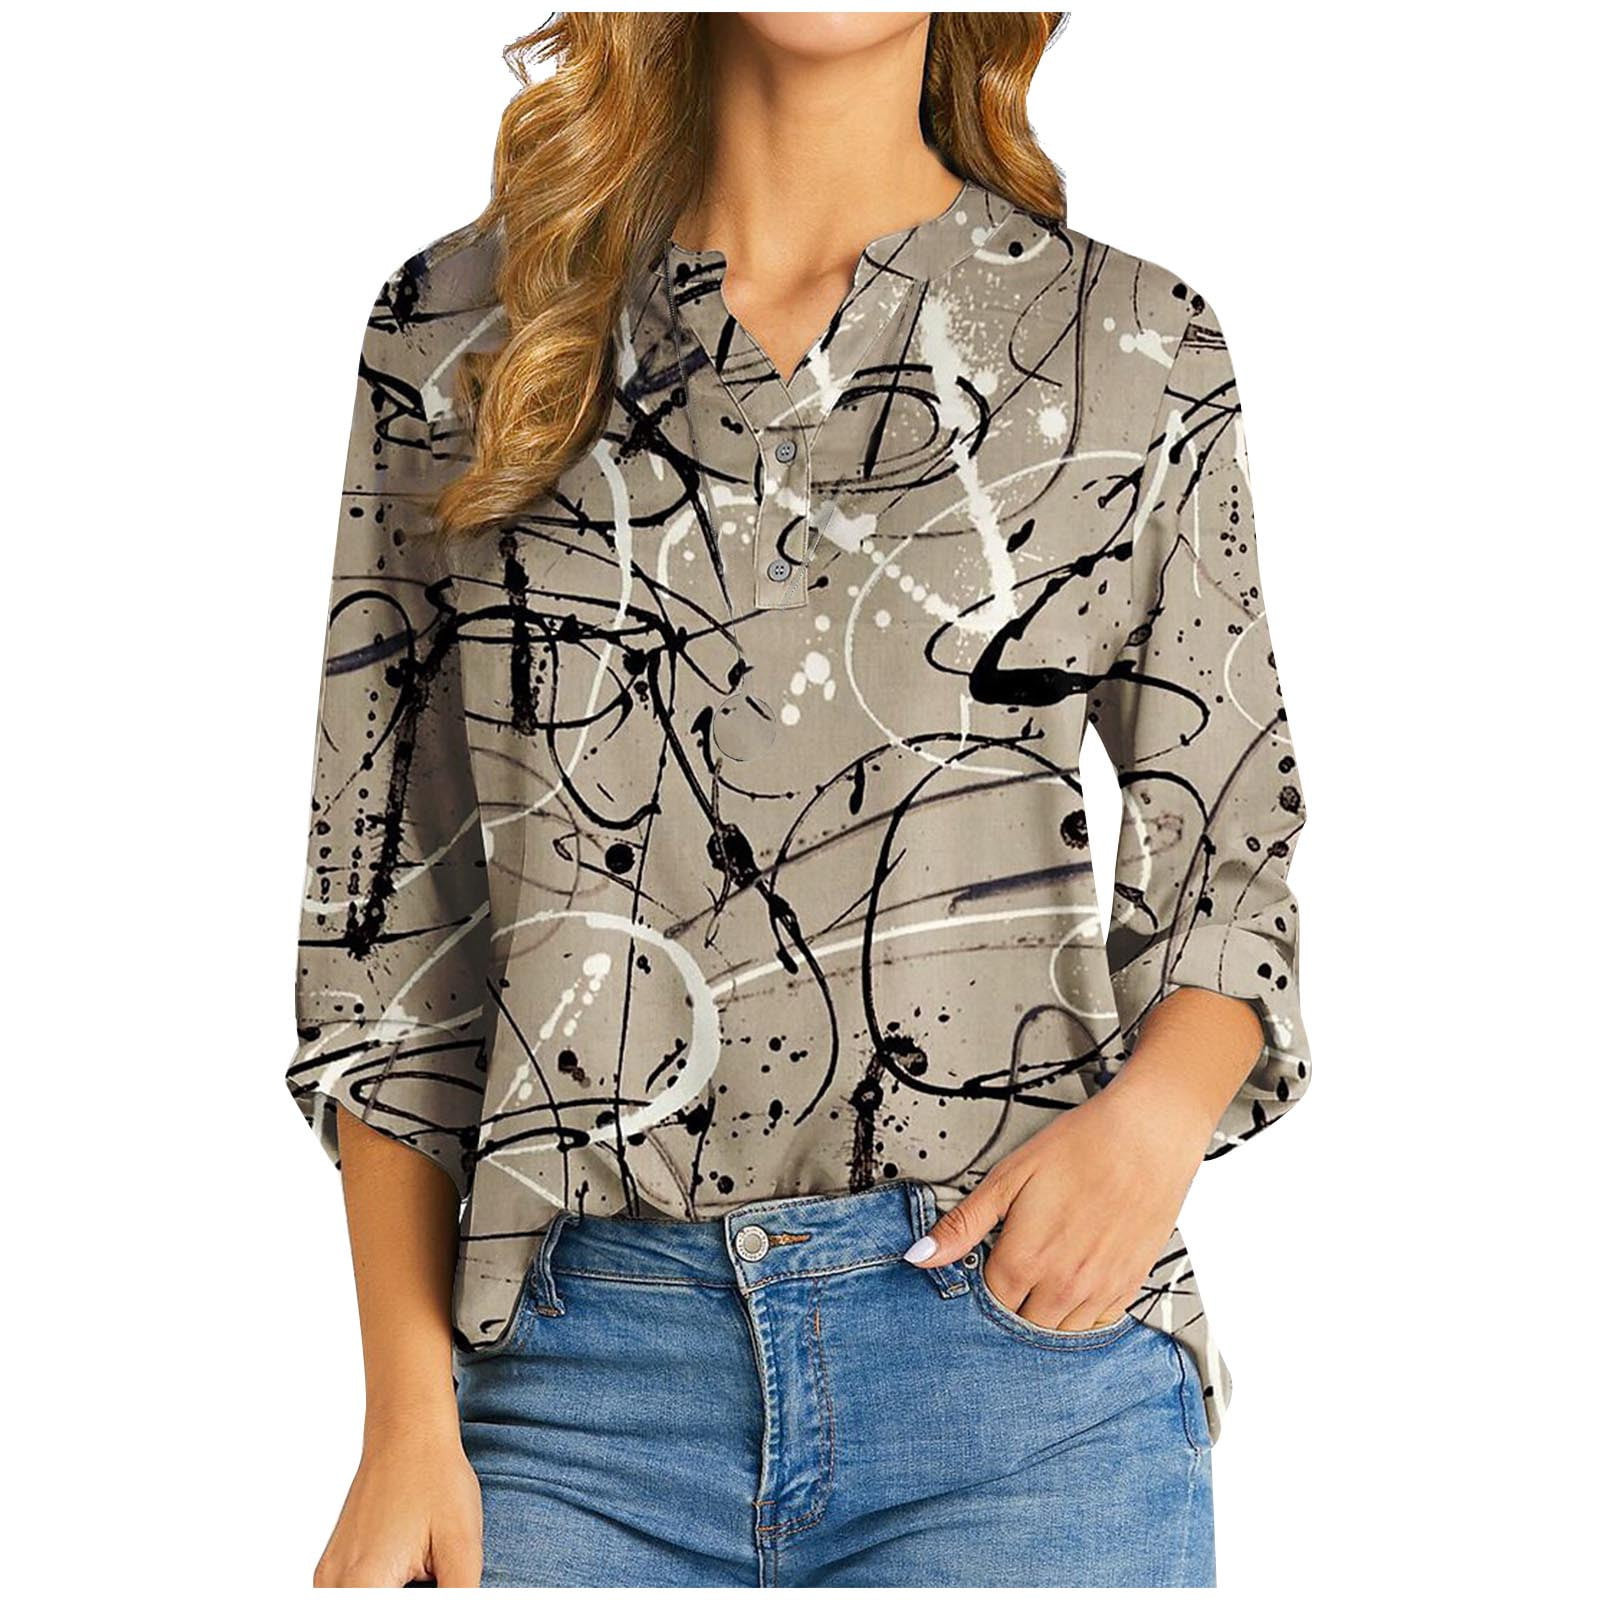 gakvbuo Clearance Items All 2022!Fall Clothes For Women 2022 Trendy  Business Casual Plus Size Tops For WomenWomen Fashion Casual Square Collar  Printing Elasticity Long Sleeve Loose T-Shirt Blouse Tops 